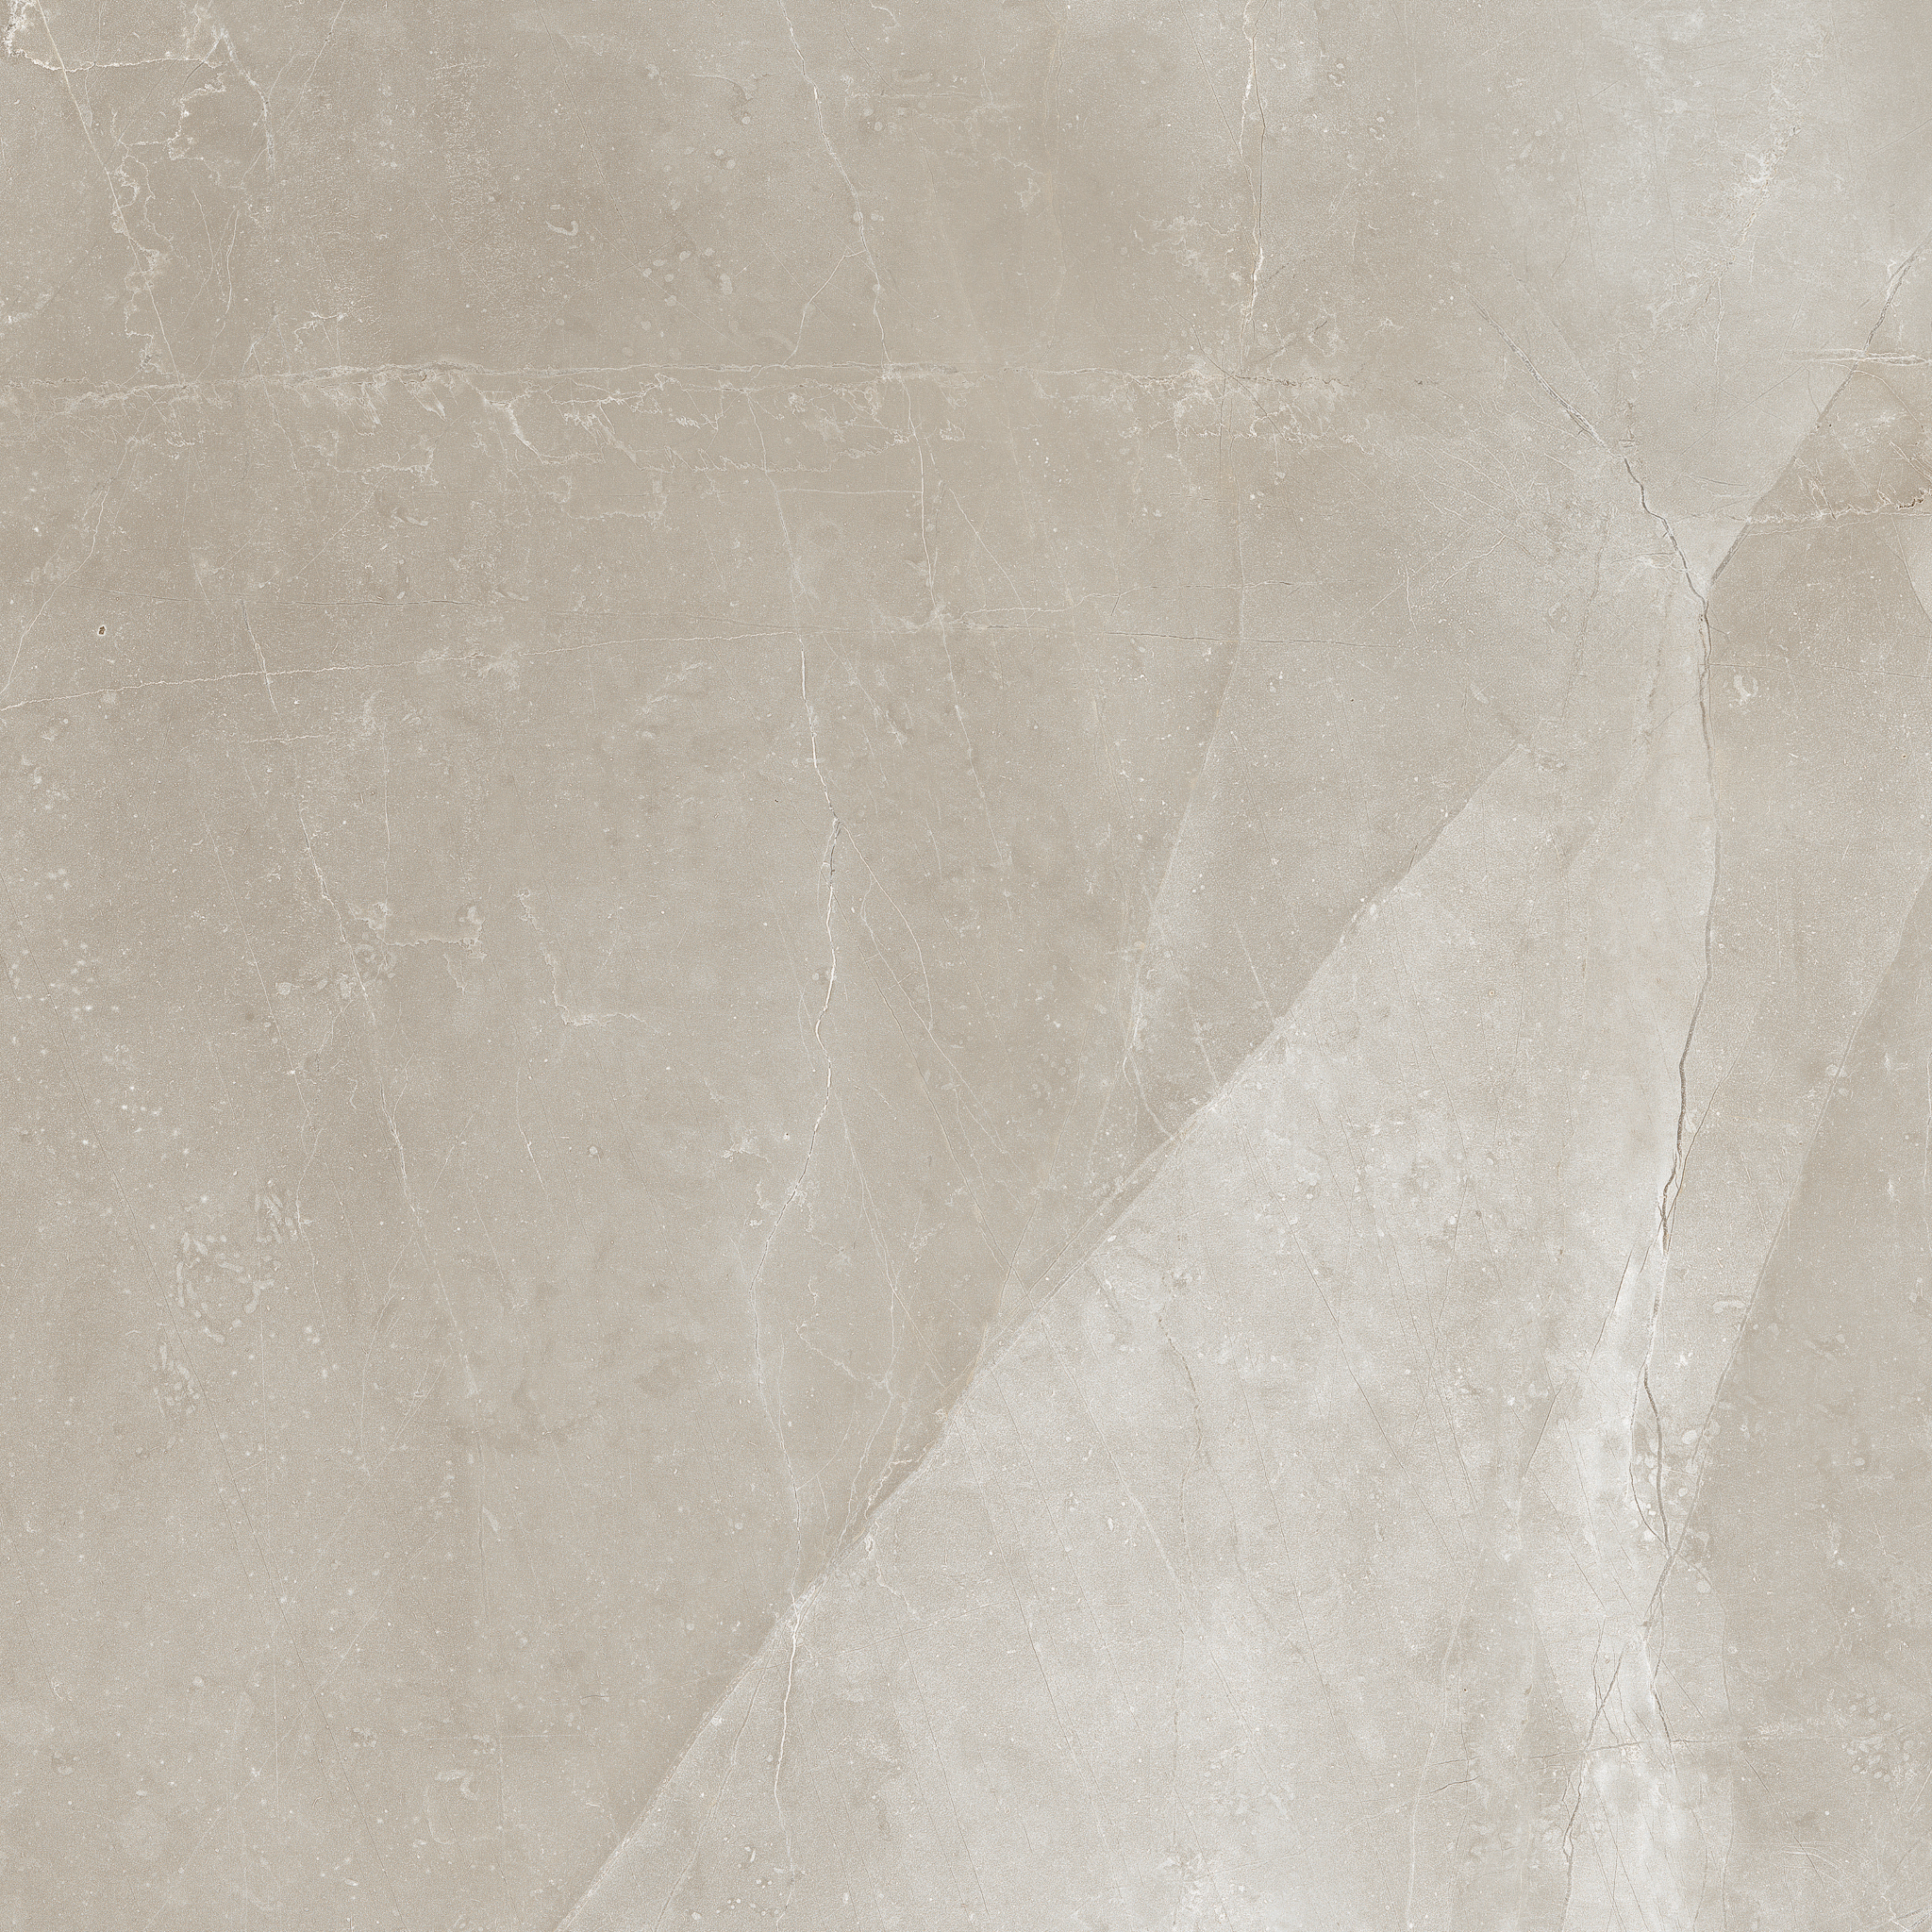 pulpis grey pattern glazed porcelain field tile from classic anatolia collection distributed by surface group international matte finish pressed edge 18x18 square shape